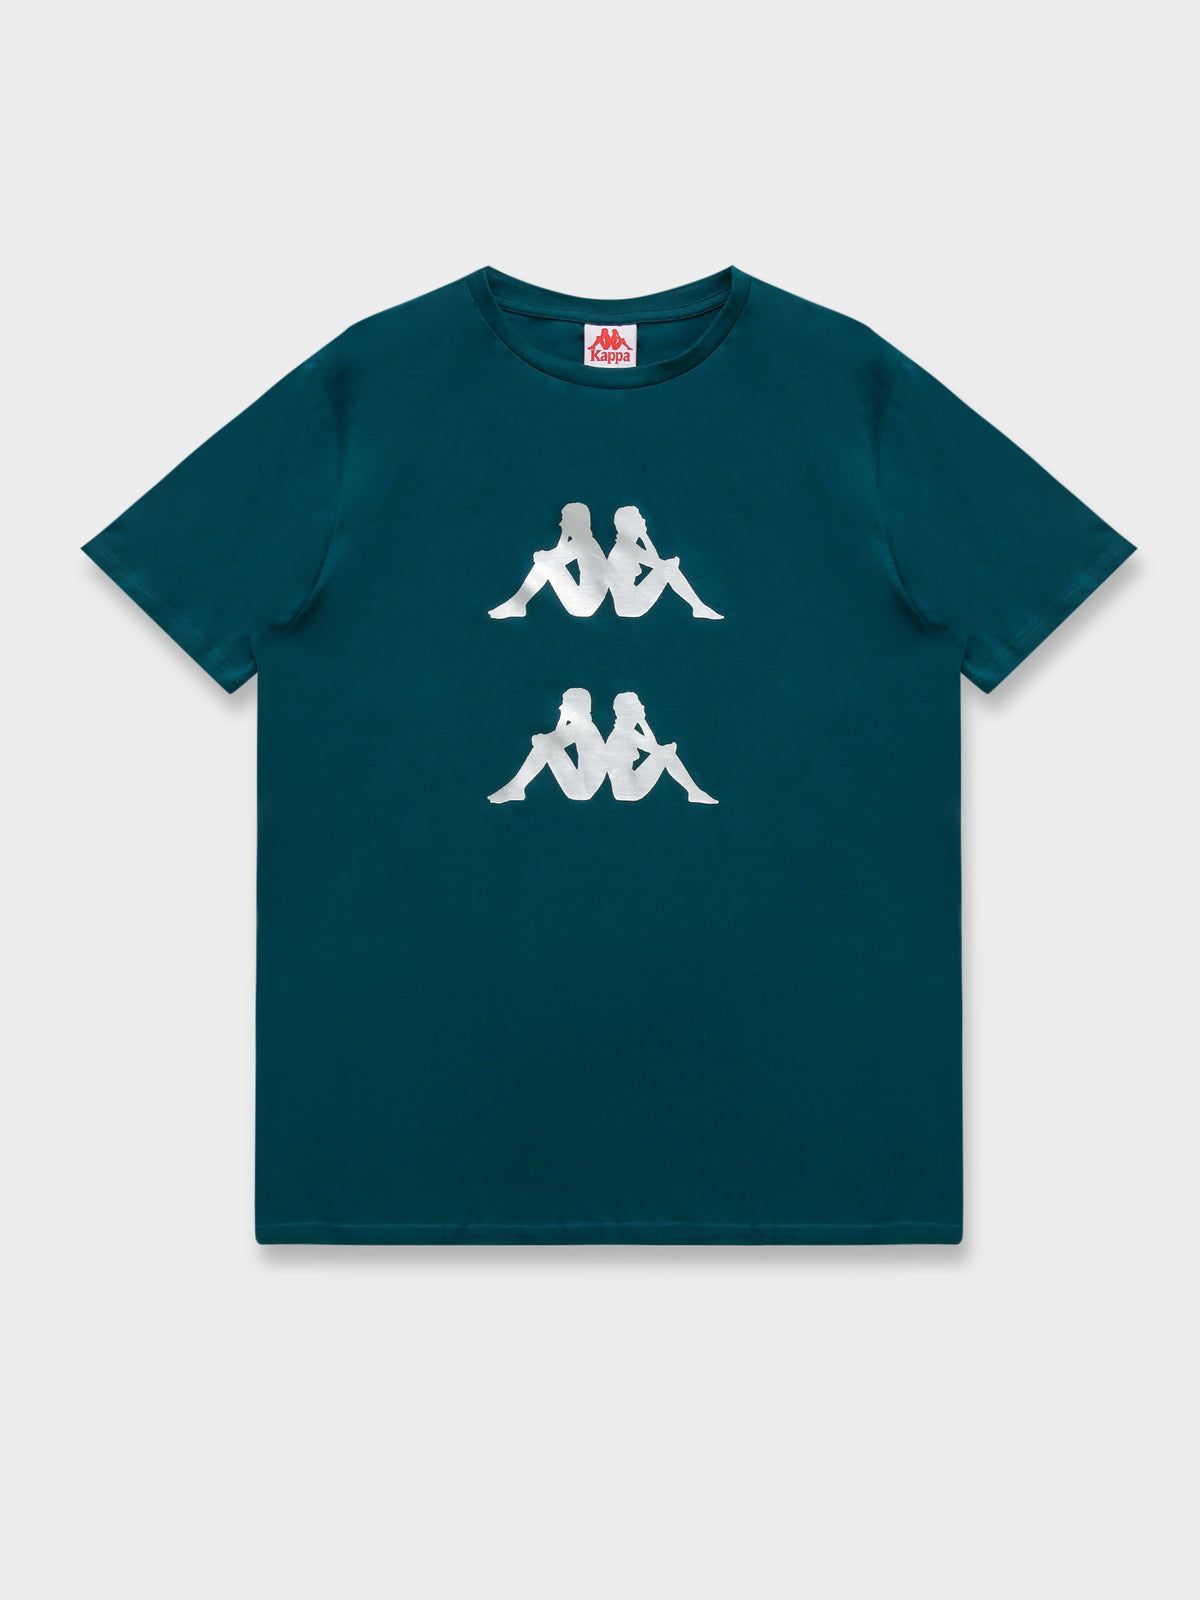 Authentic Dorian T-Shirt in Teal